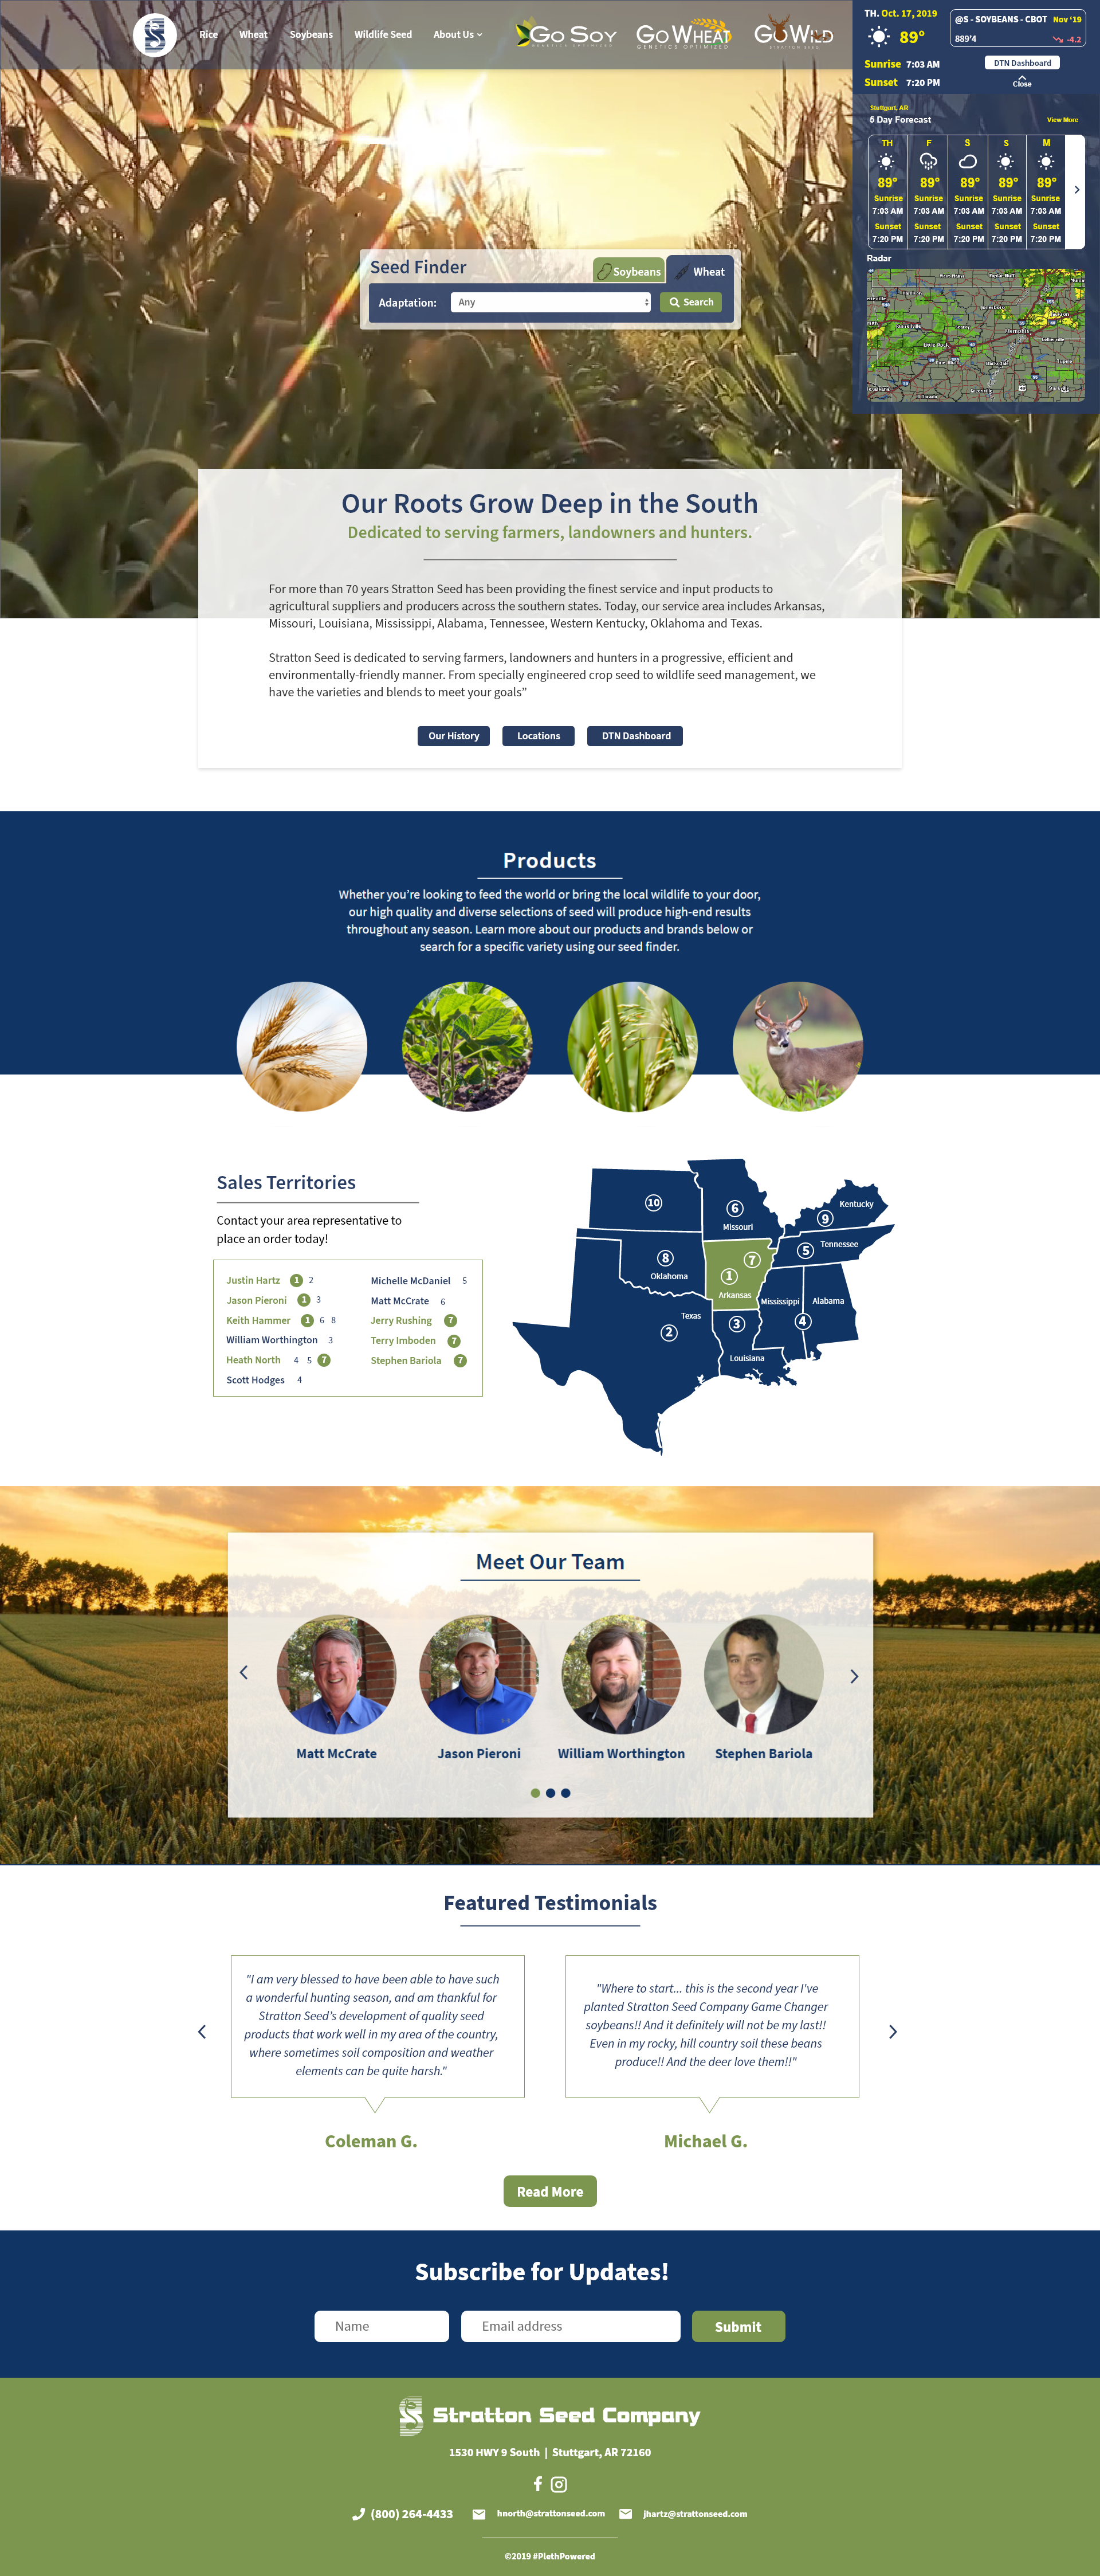 Homepage layout of Stratton Seed website